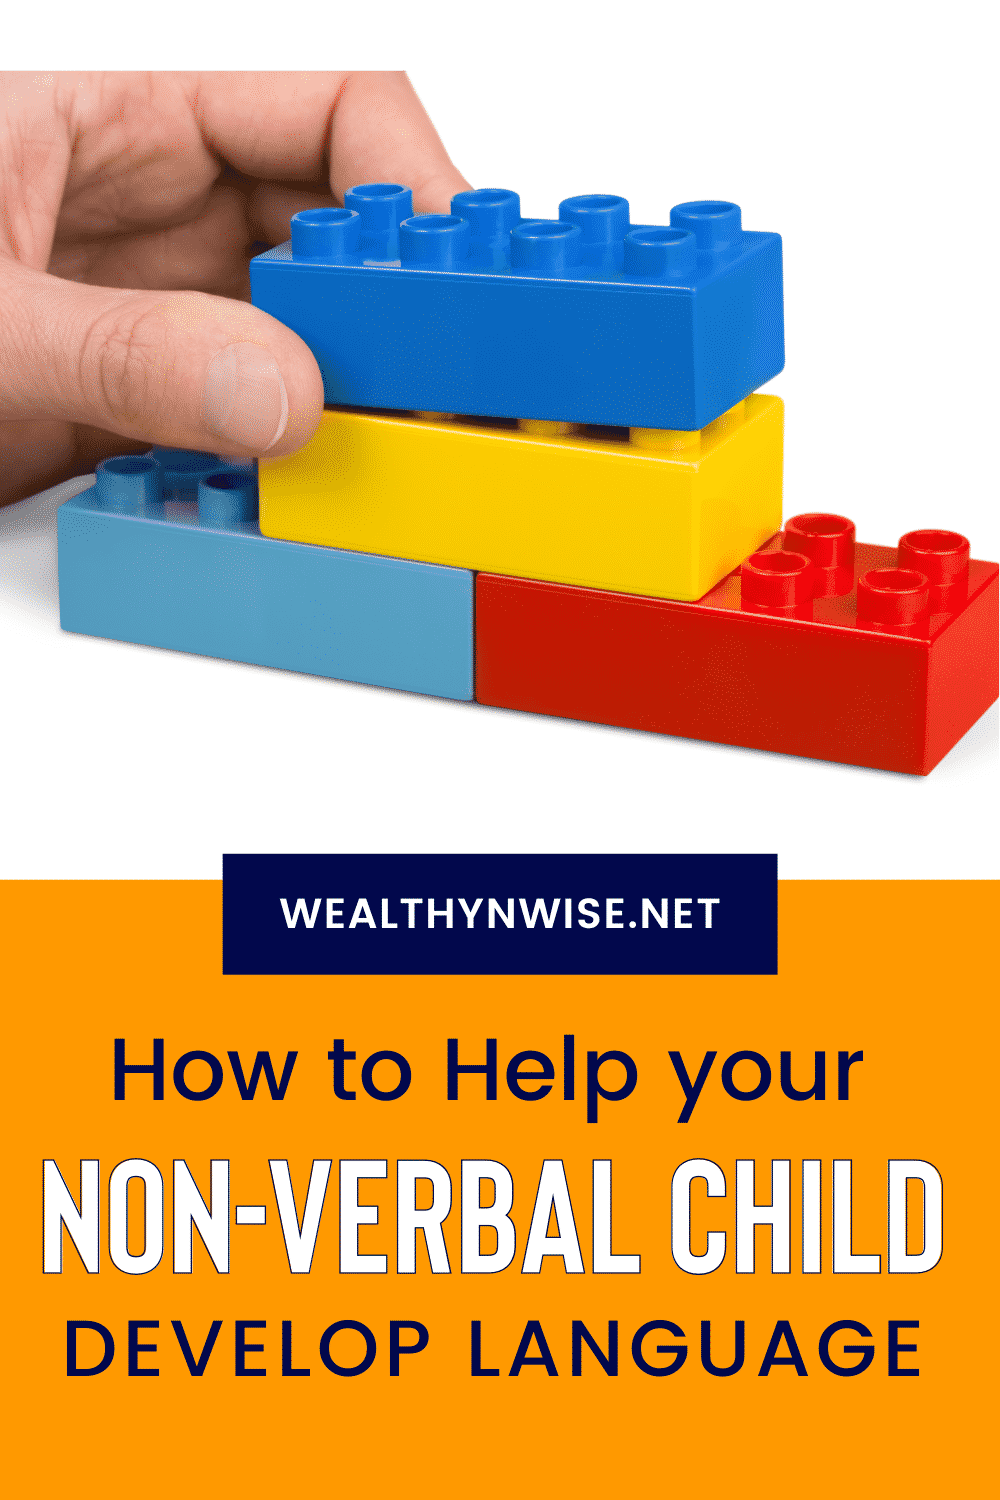 If your toddler has a language delay, check out these tips for language development. Whether your child is a toddler who is slightly behind or your child is completely non-verbal, these tips will help you do speech therapy at home.